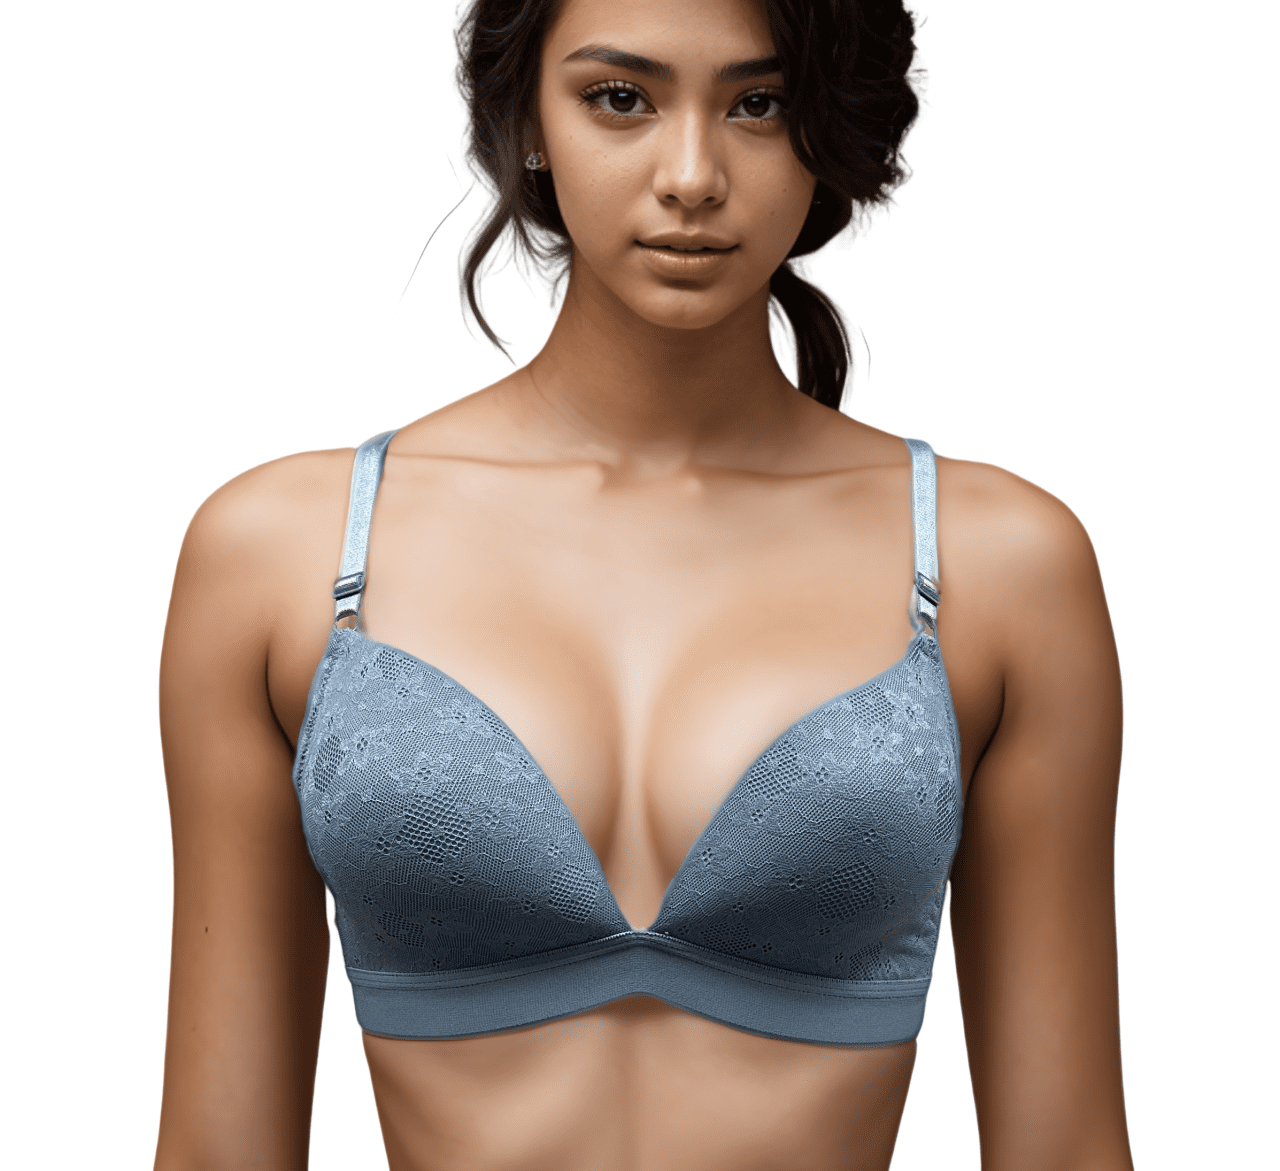 Women Bras 6 pack of No Wire Free Bra A cup B cup C cup Size 38C (S6702)